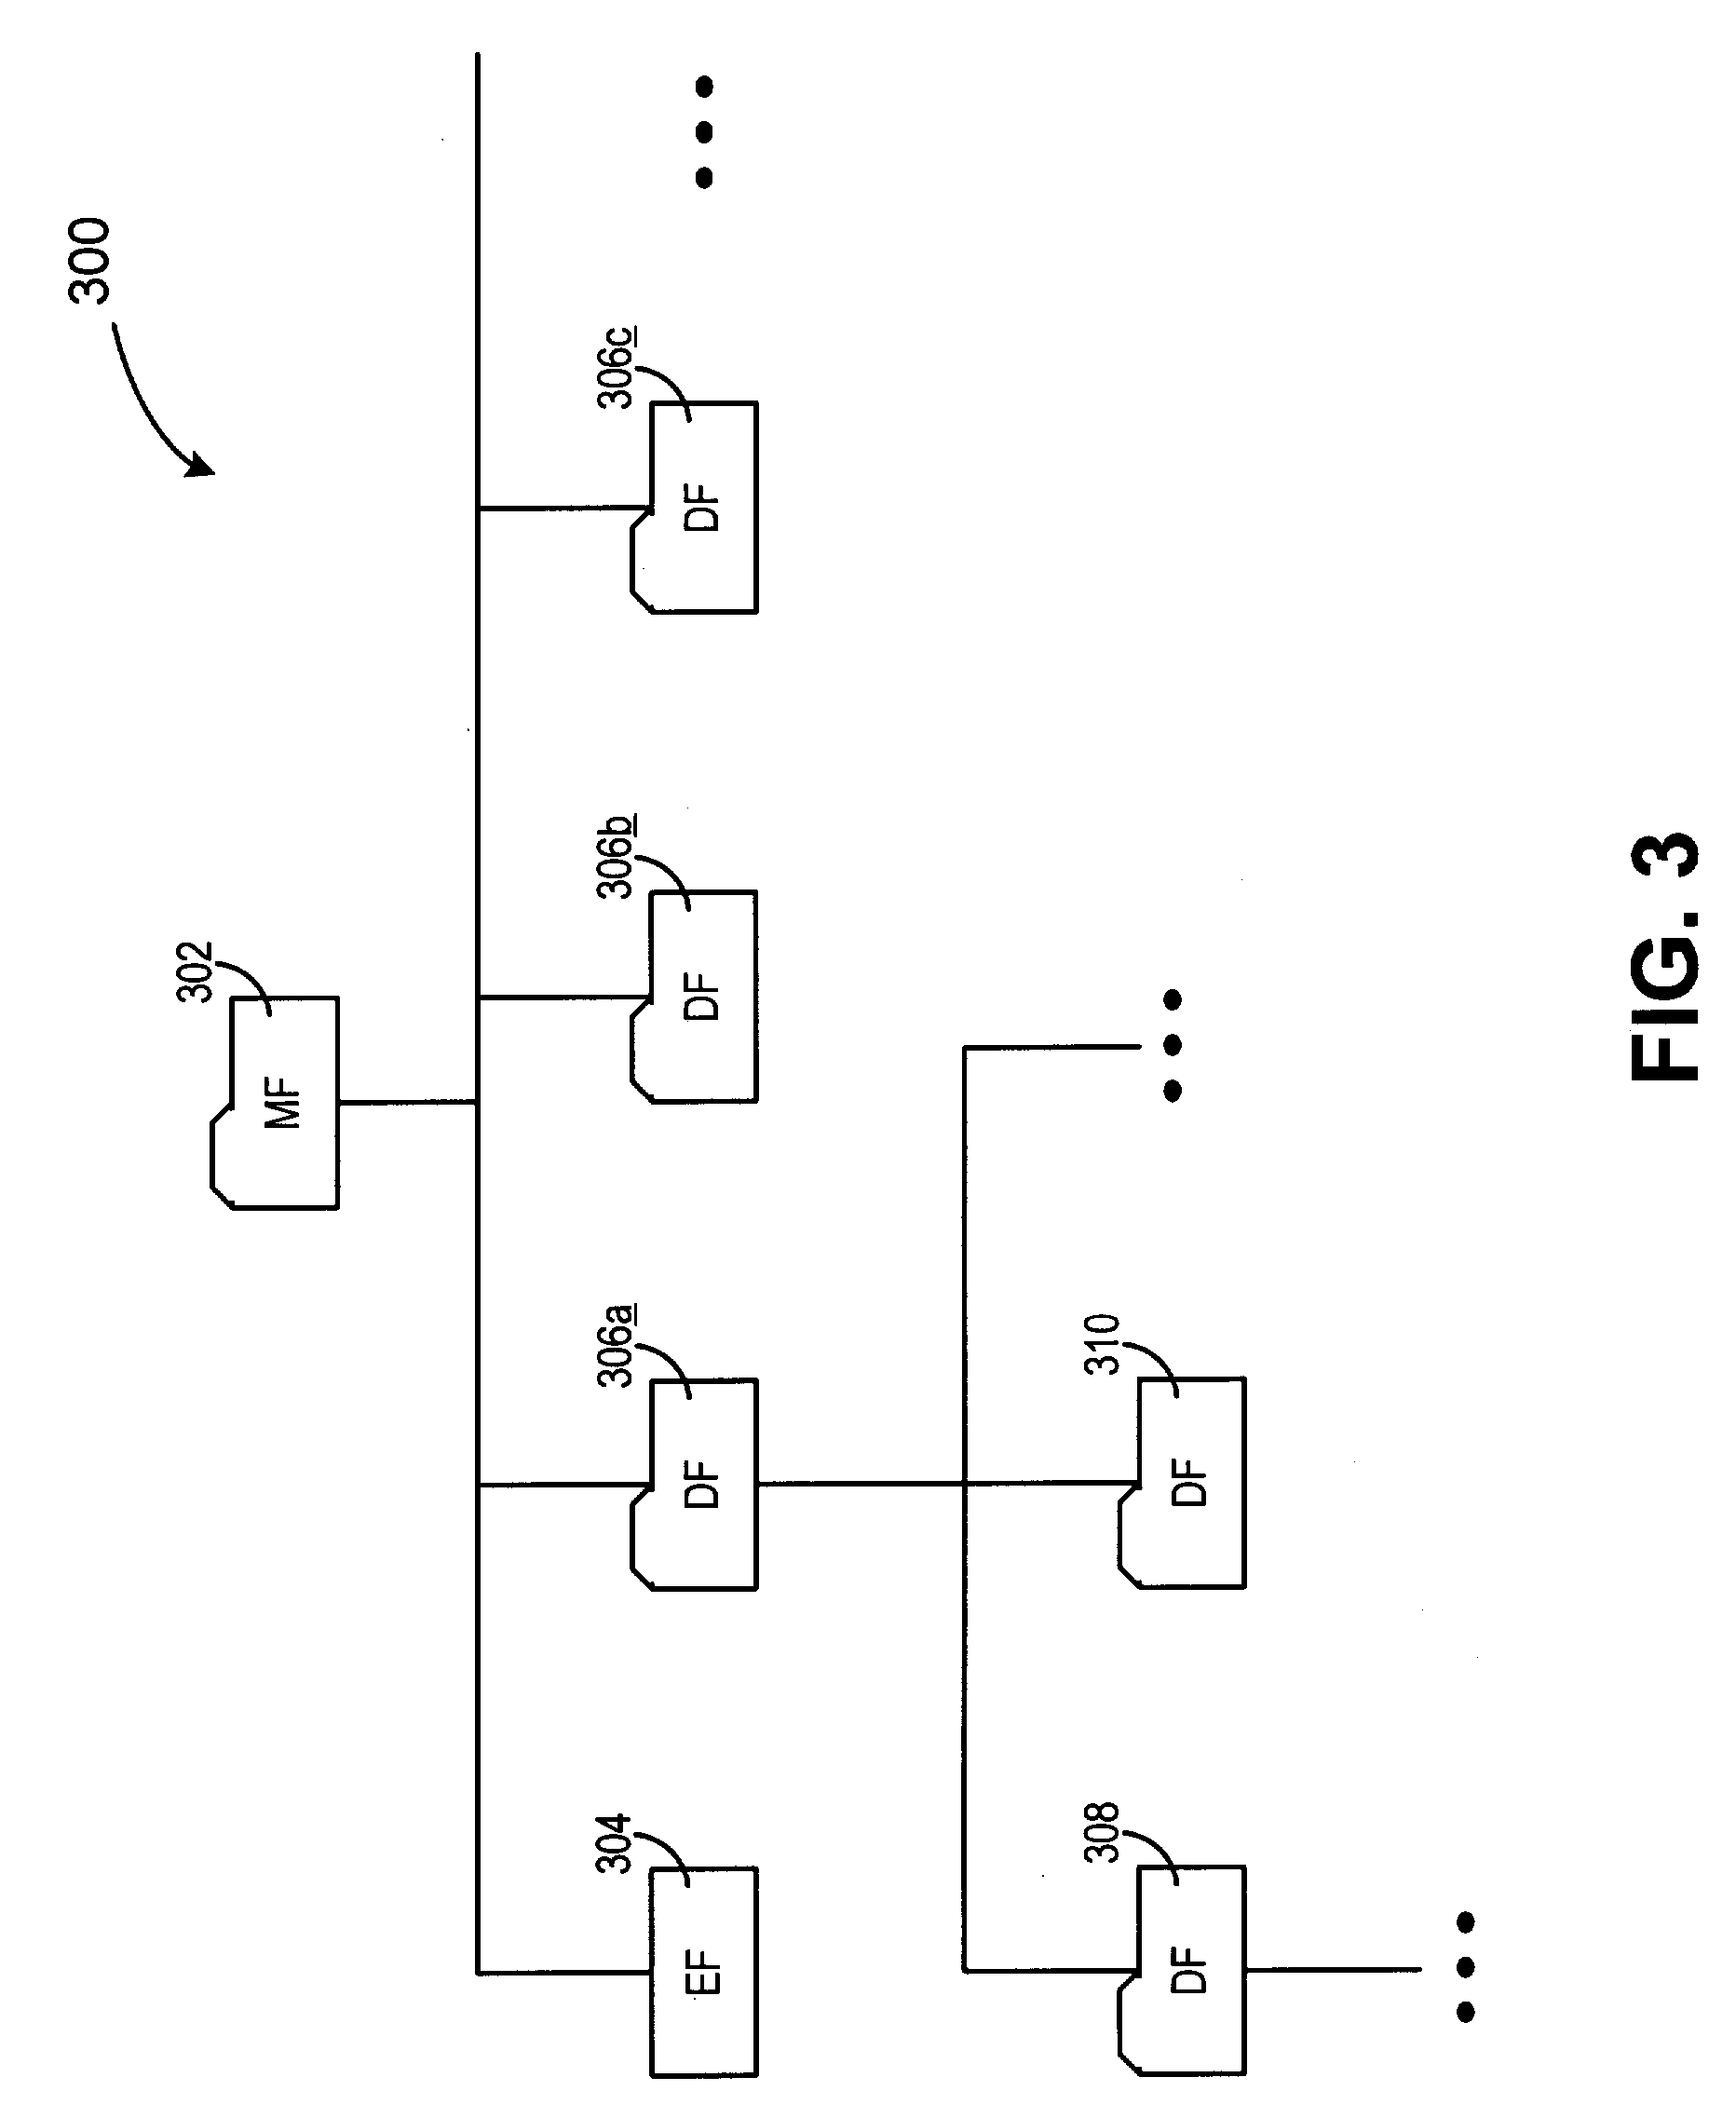 Method for biometric security using a smartcard